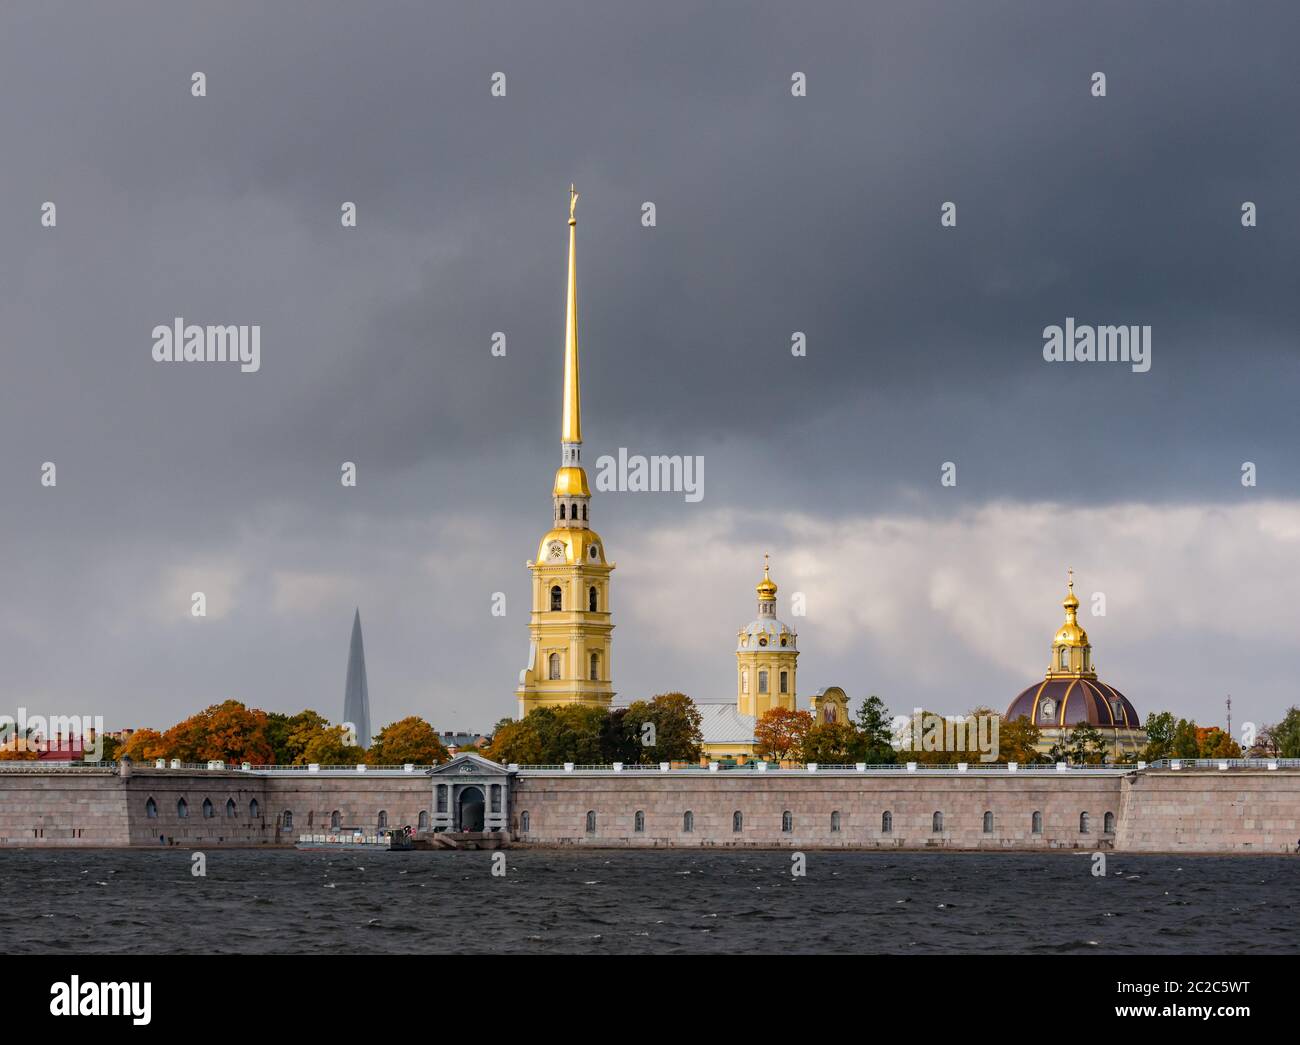 Peter and Paul Cathedral spire, Peter and Paul Fortress on Neva River with moody stormy sky, St Petersburg, Russia Stock Photo